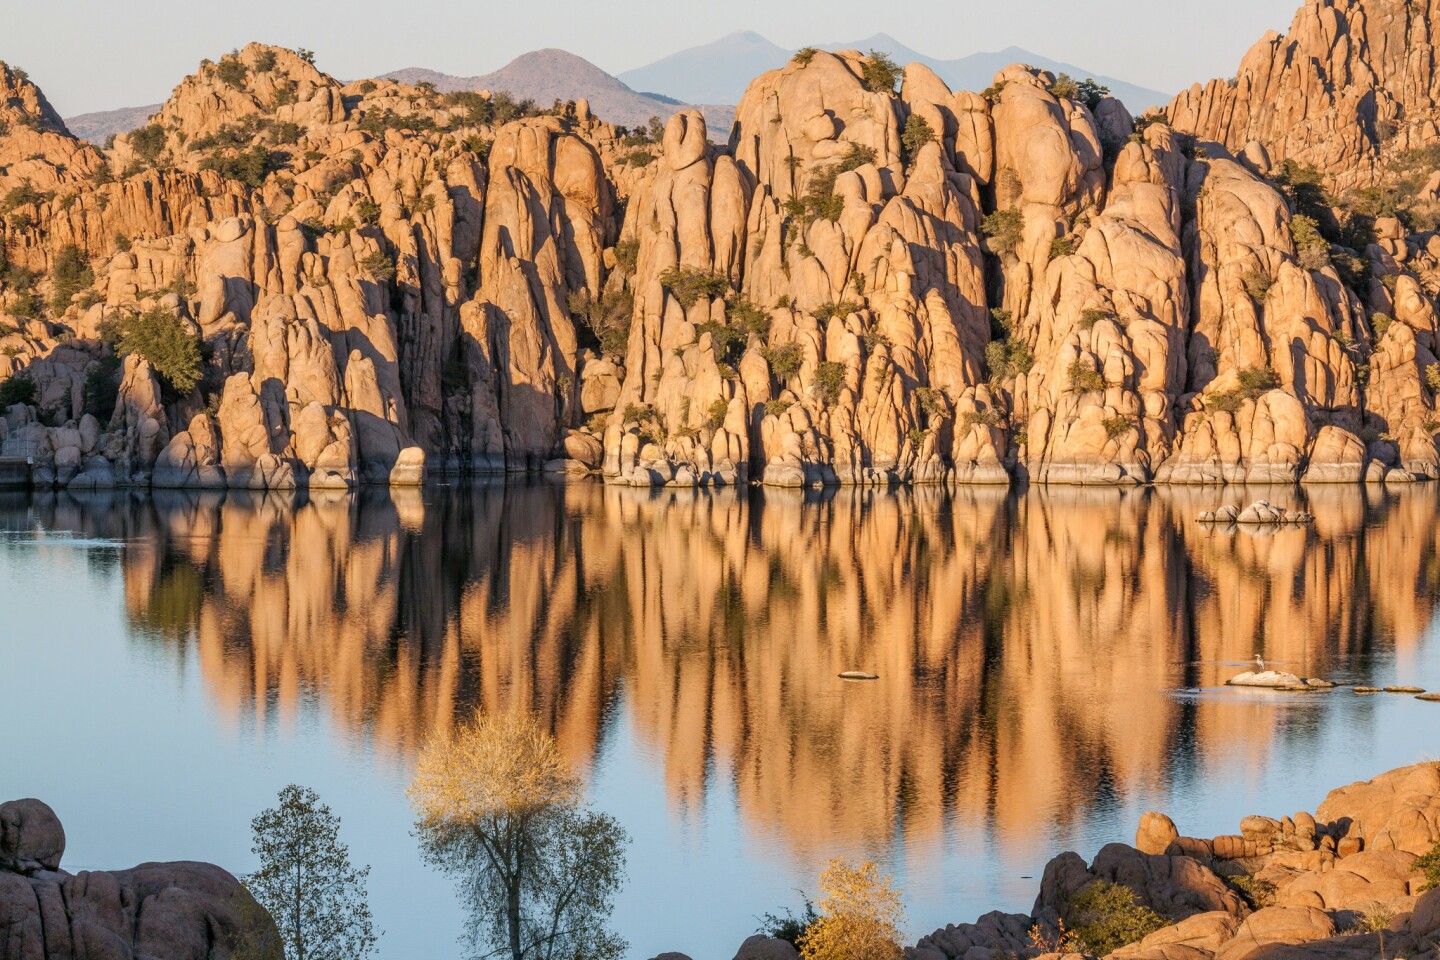 Prehistoric rock formations surround Watson Lake, about 20 minutes north of downtown Prescott, Ariz.